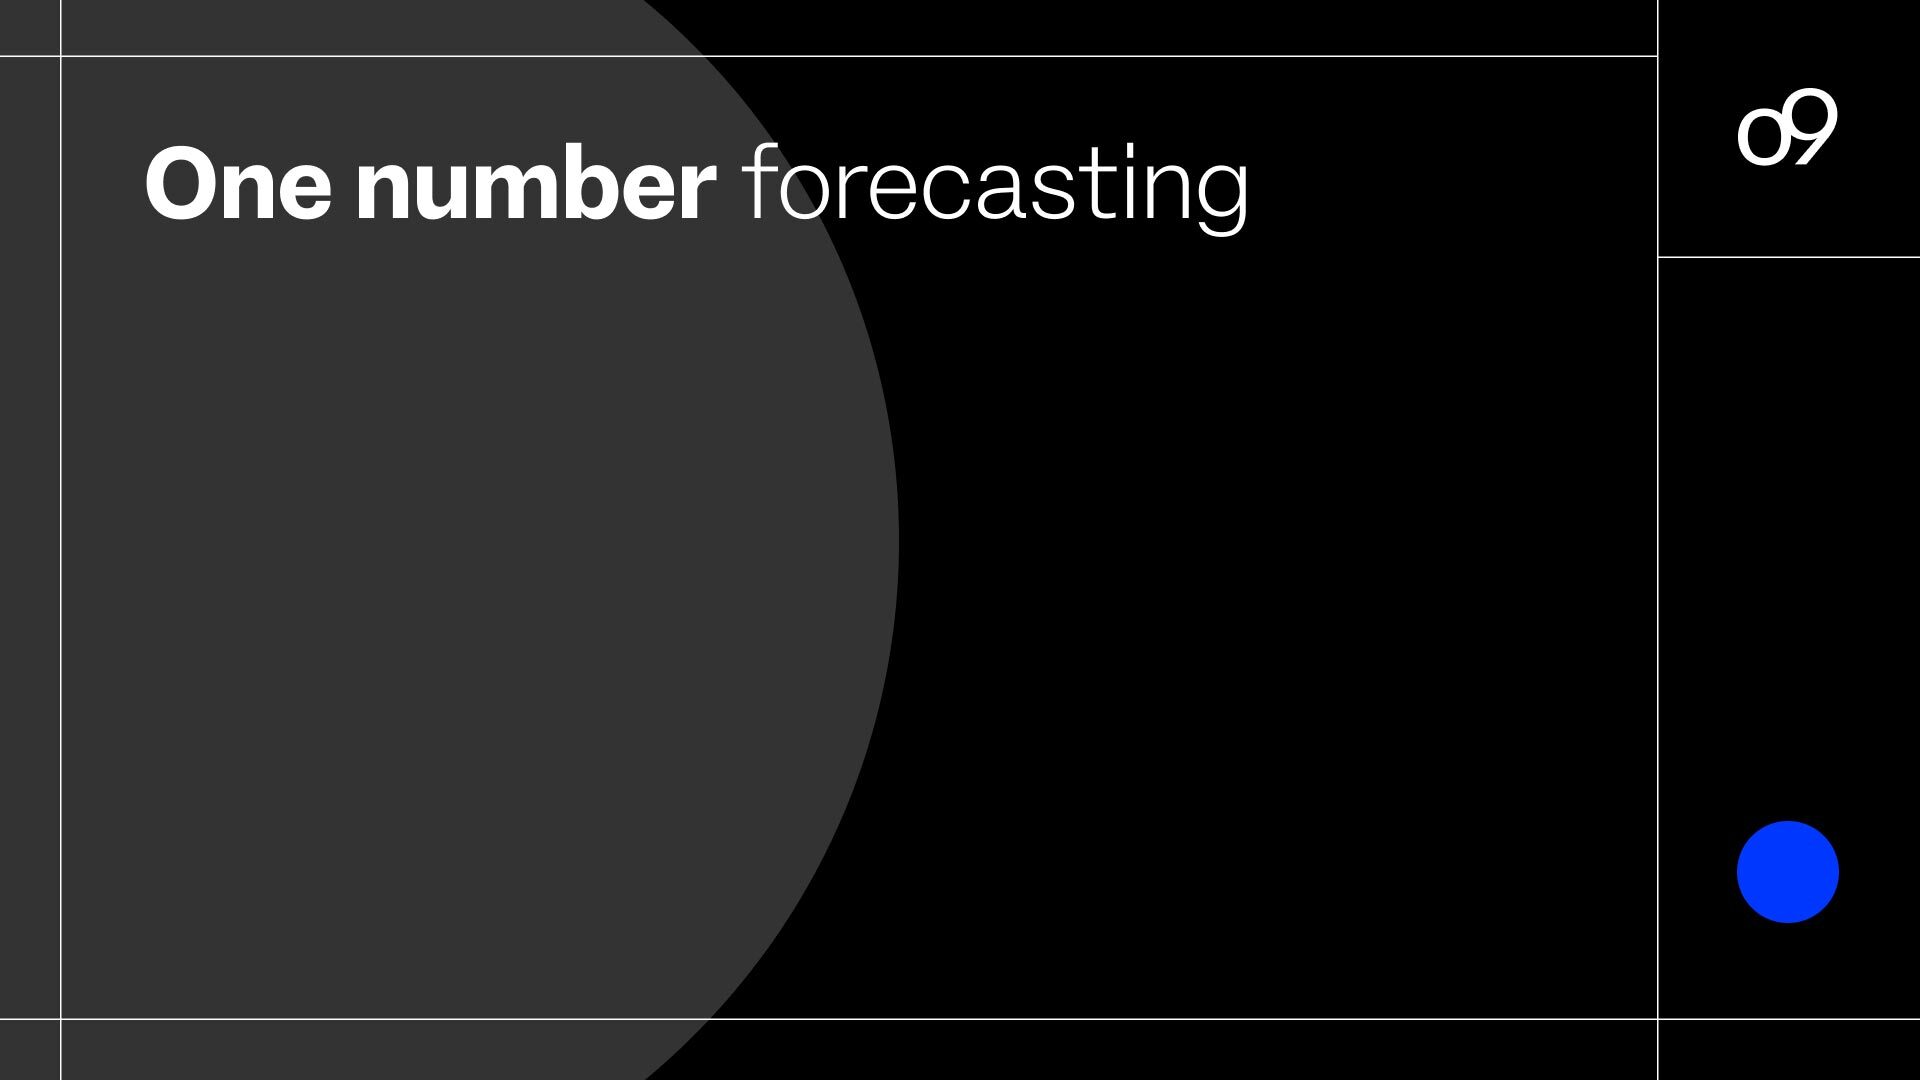 One number forecast